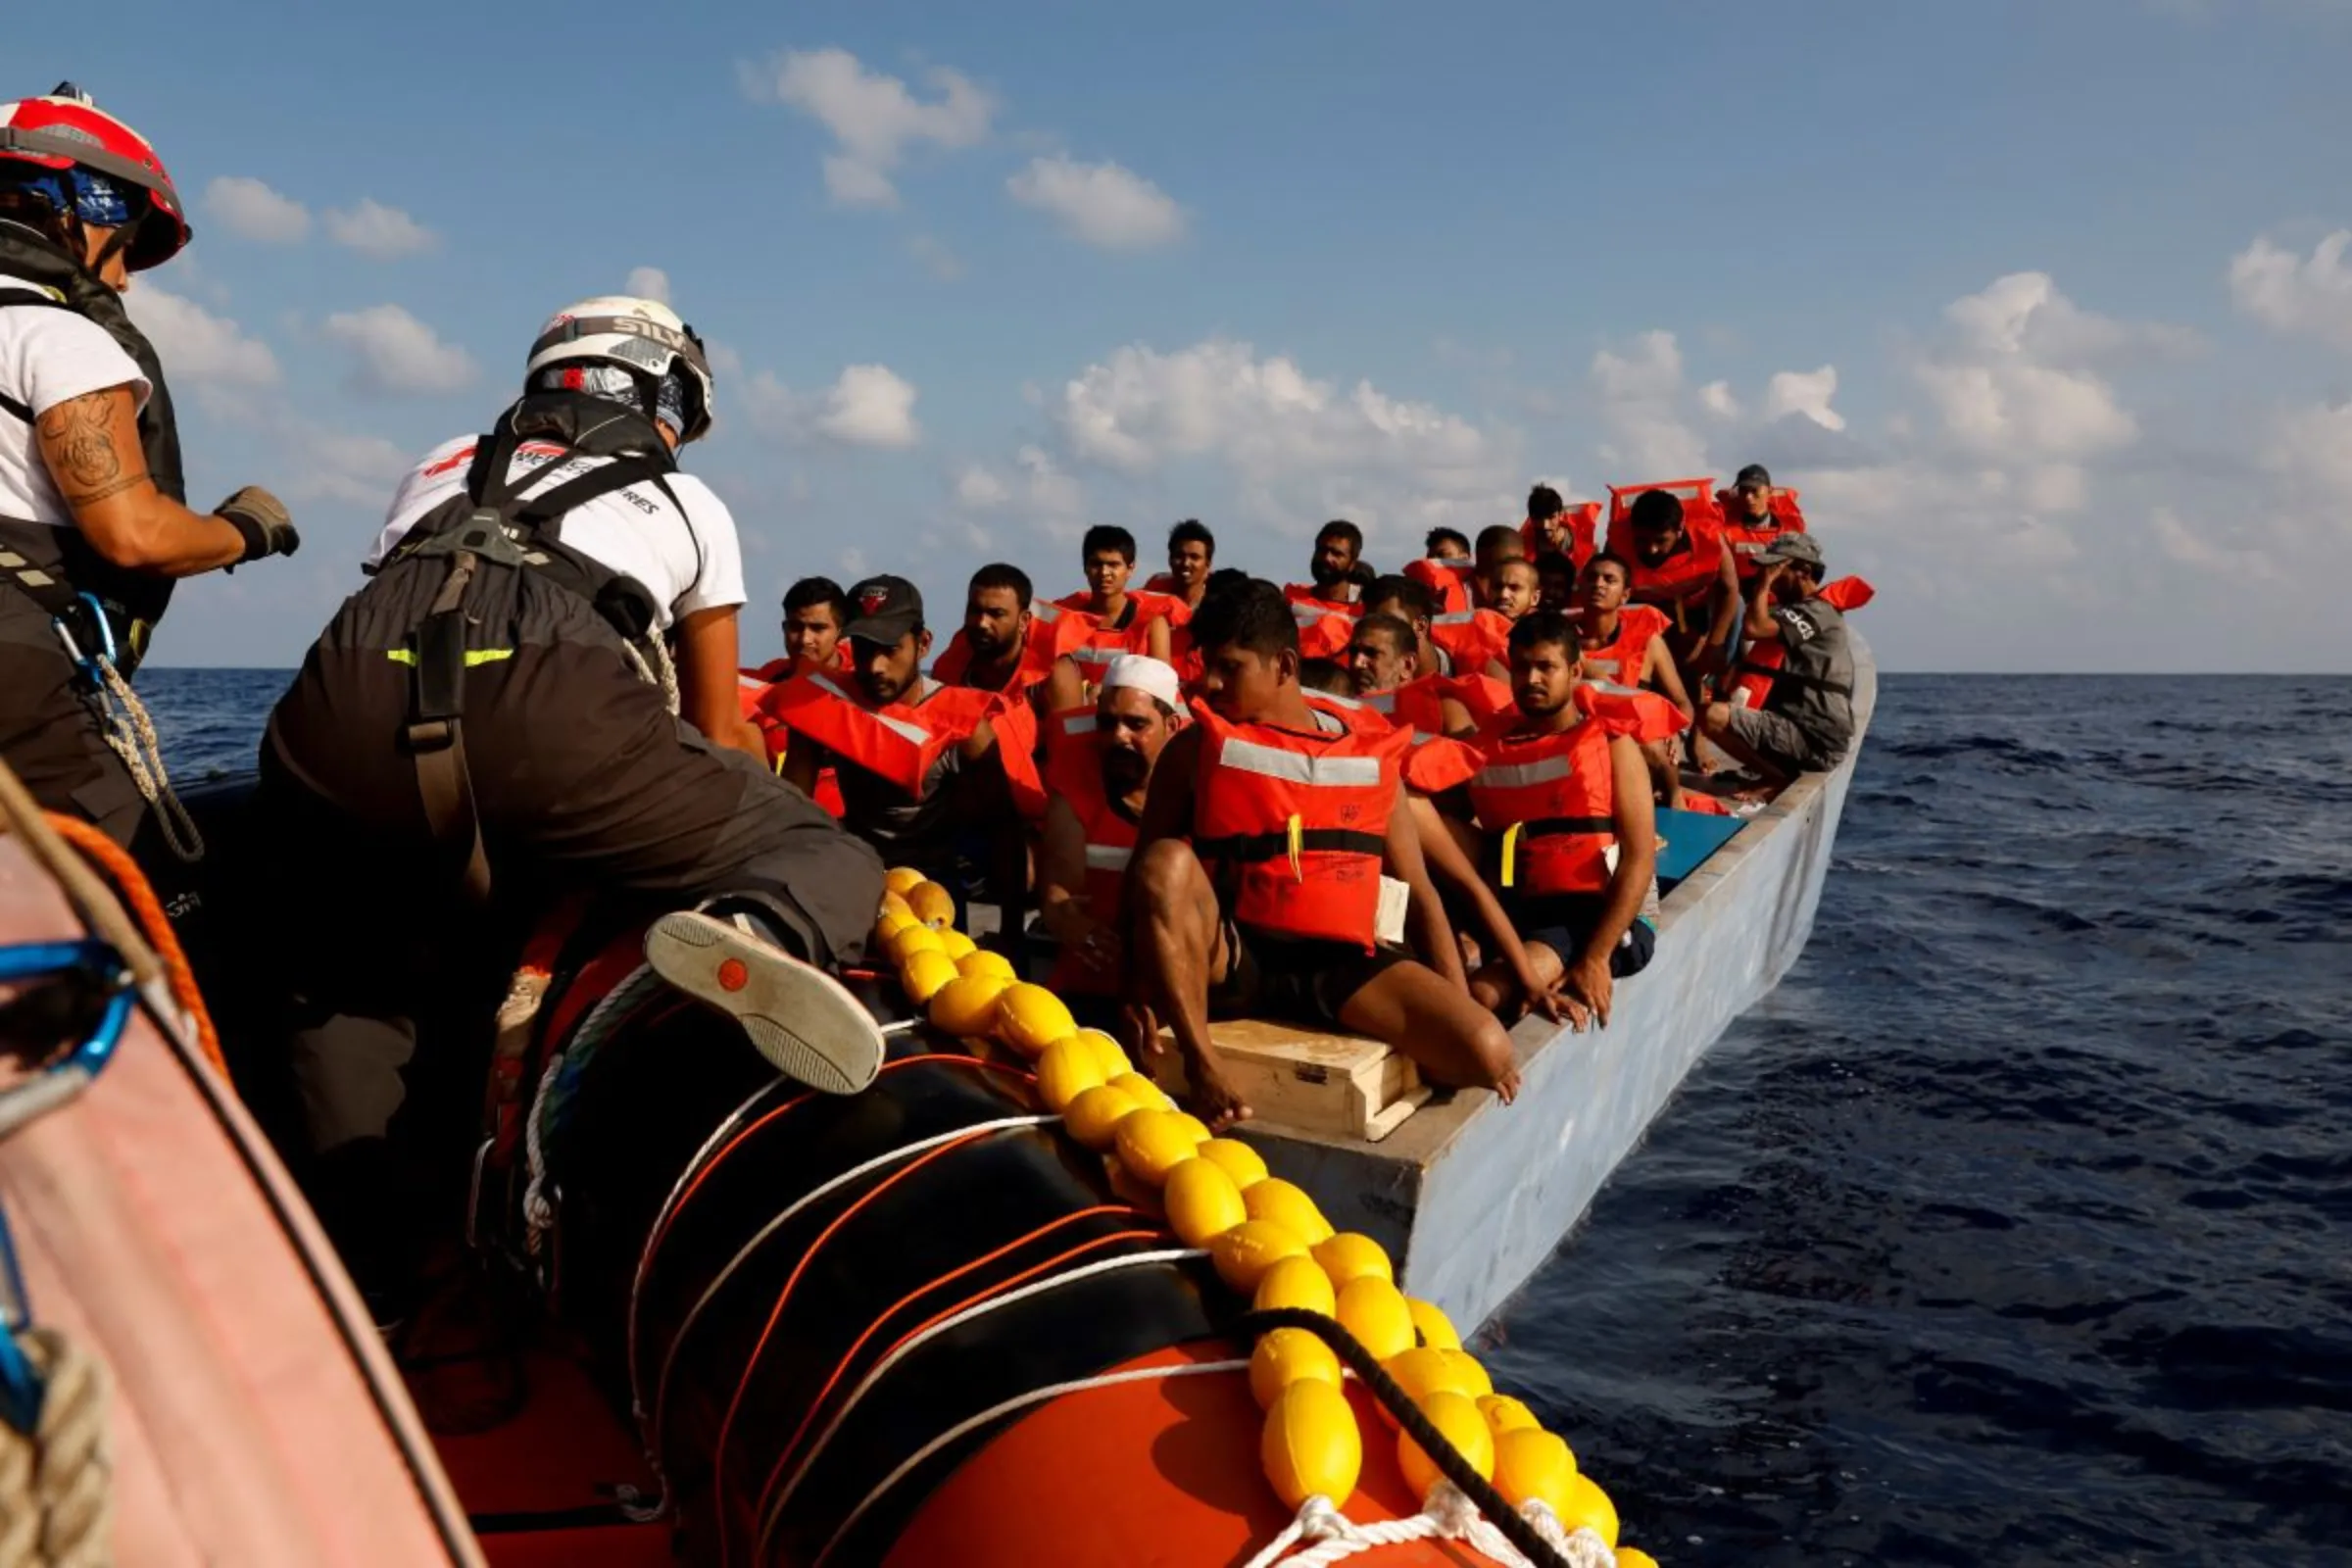 A group of 61 migrants on a wooden boat are rescued by crew members of the Geo Barents migrant rescue ship, operated by Medecins Sans Frontieres (Doctors Without Borders), in international waters off the coast of Libya in the central Mediterranean Sea September 28, 2023. REUTERS/Darrin Zammit Lupi